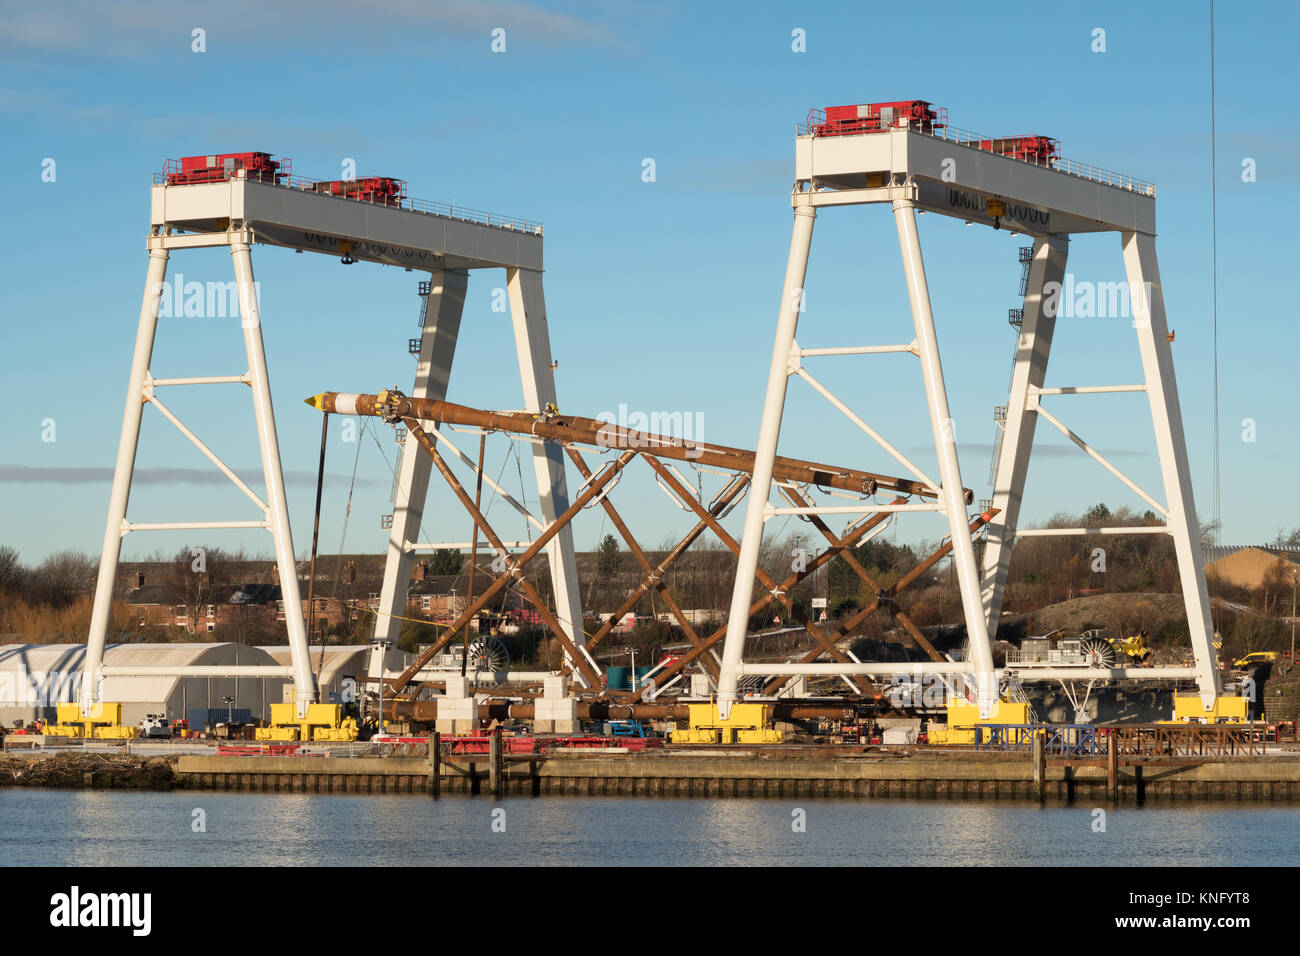 Offshore wind turbine support being built at Smulders Hadrian Yard on the Tyne, Wallsend, north east England, UK Stock Photo